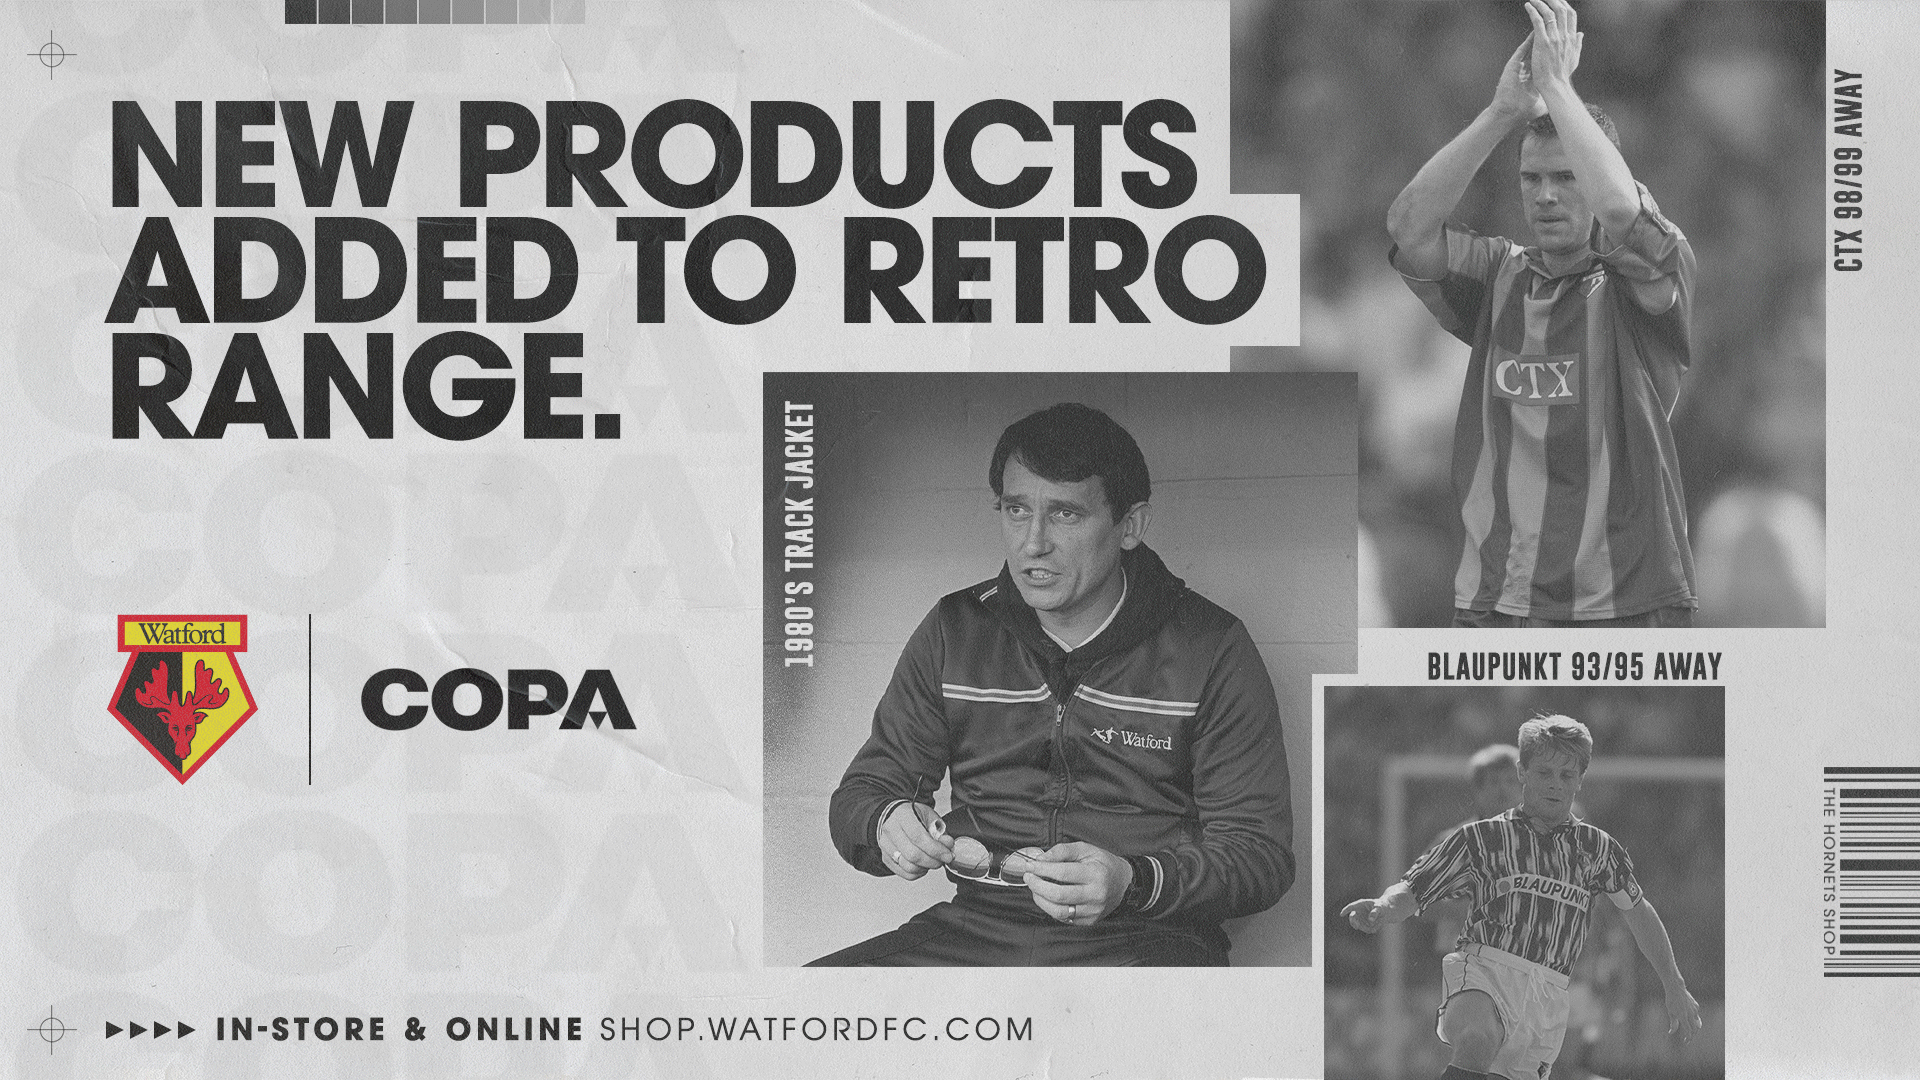 New products added to the retro range